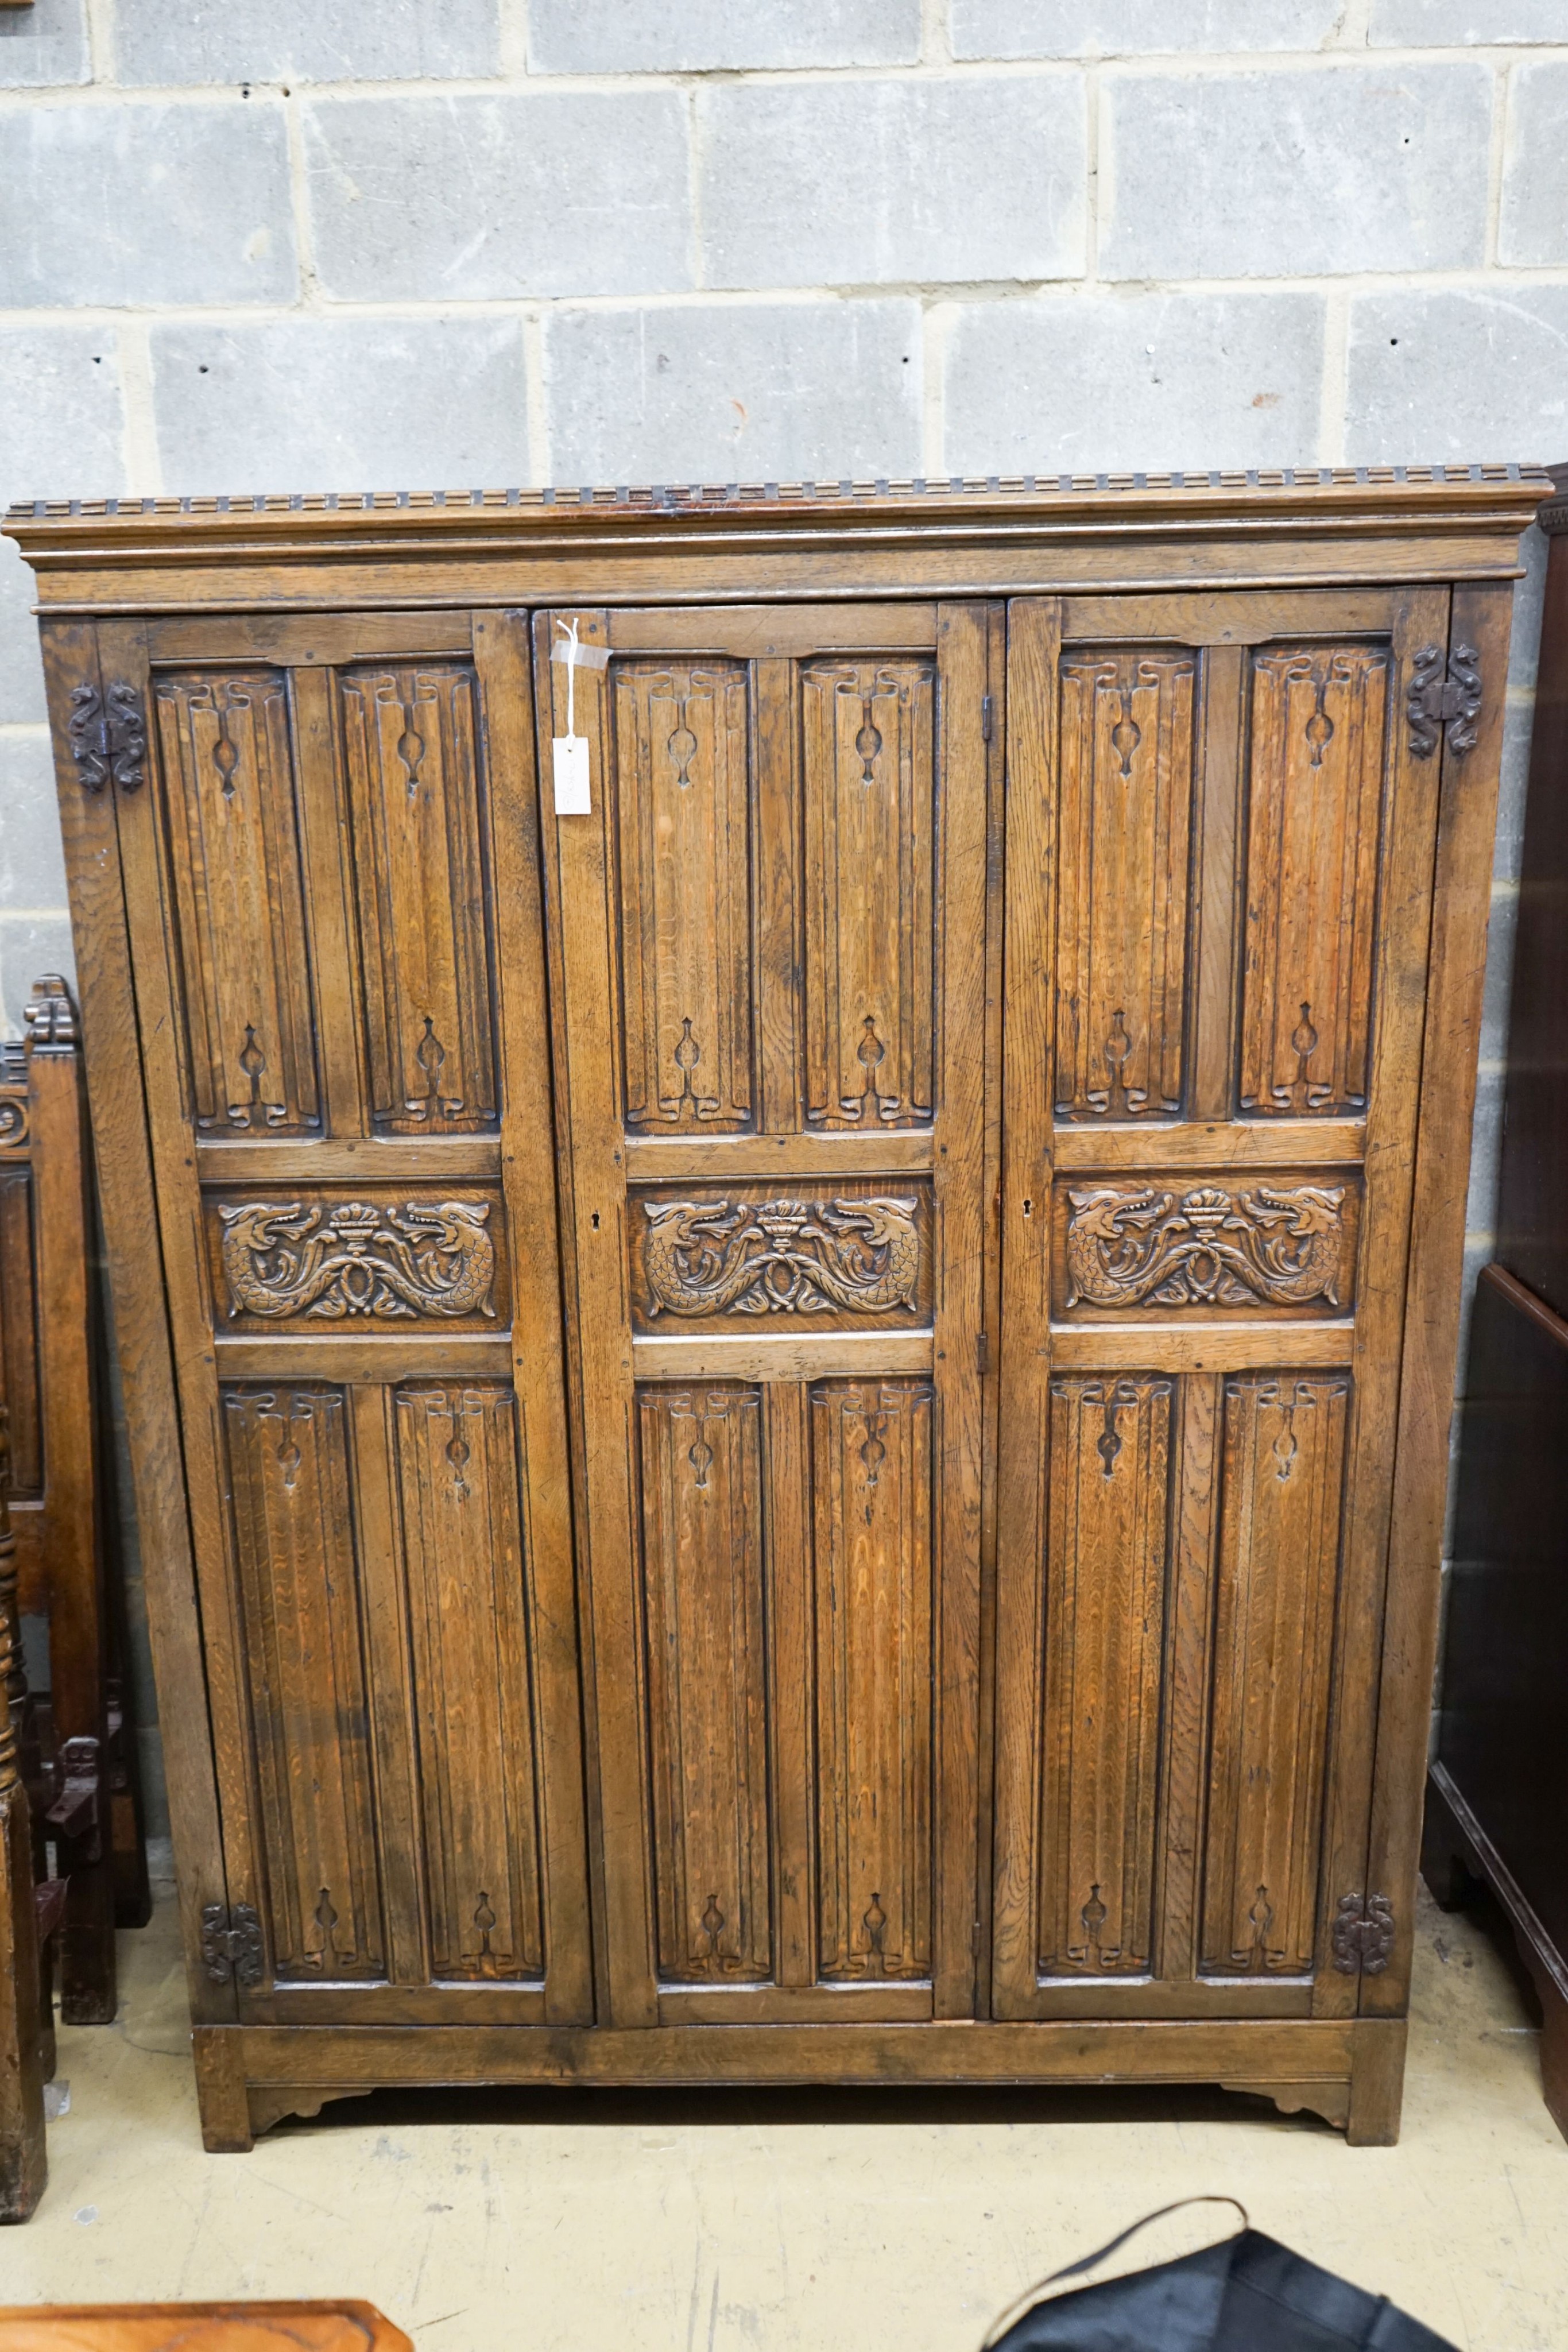 A 17th century style carved and panelled oak triple wardrobe with linenfold decoration, and a pair of early 20th century revival linenfold carved single bedframes, width 91cm, height 130cm